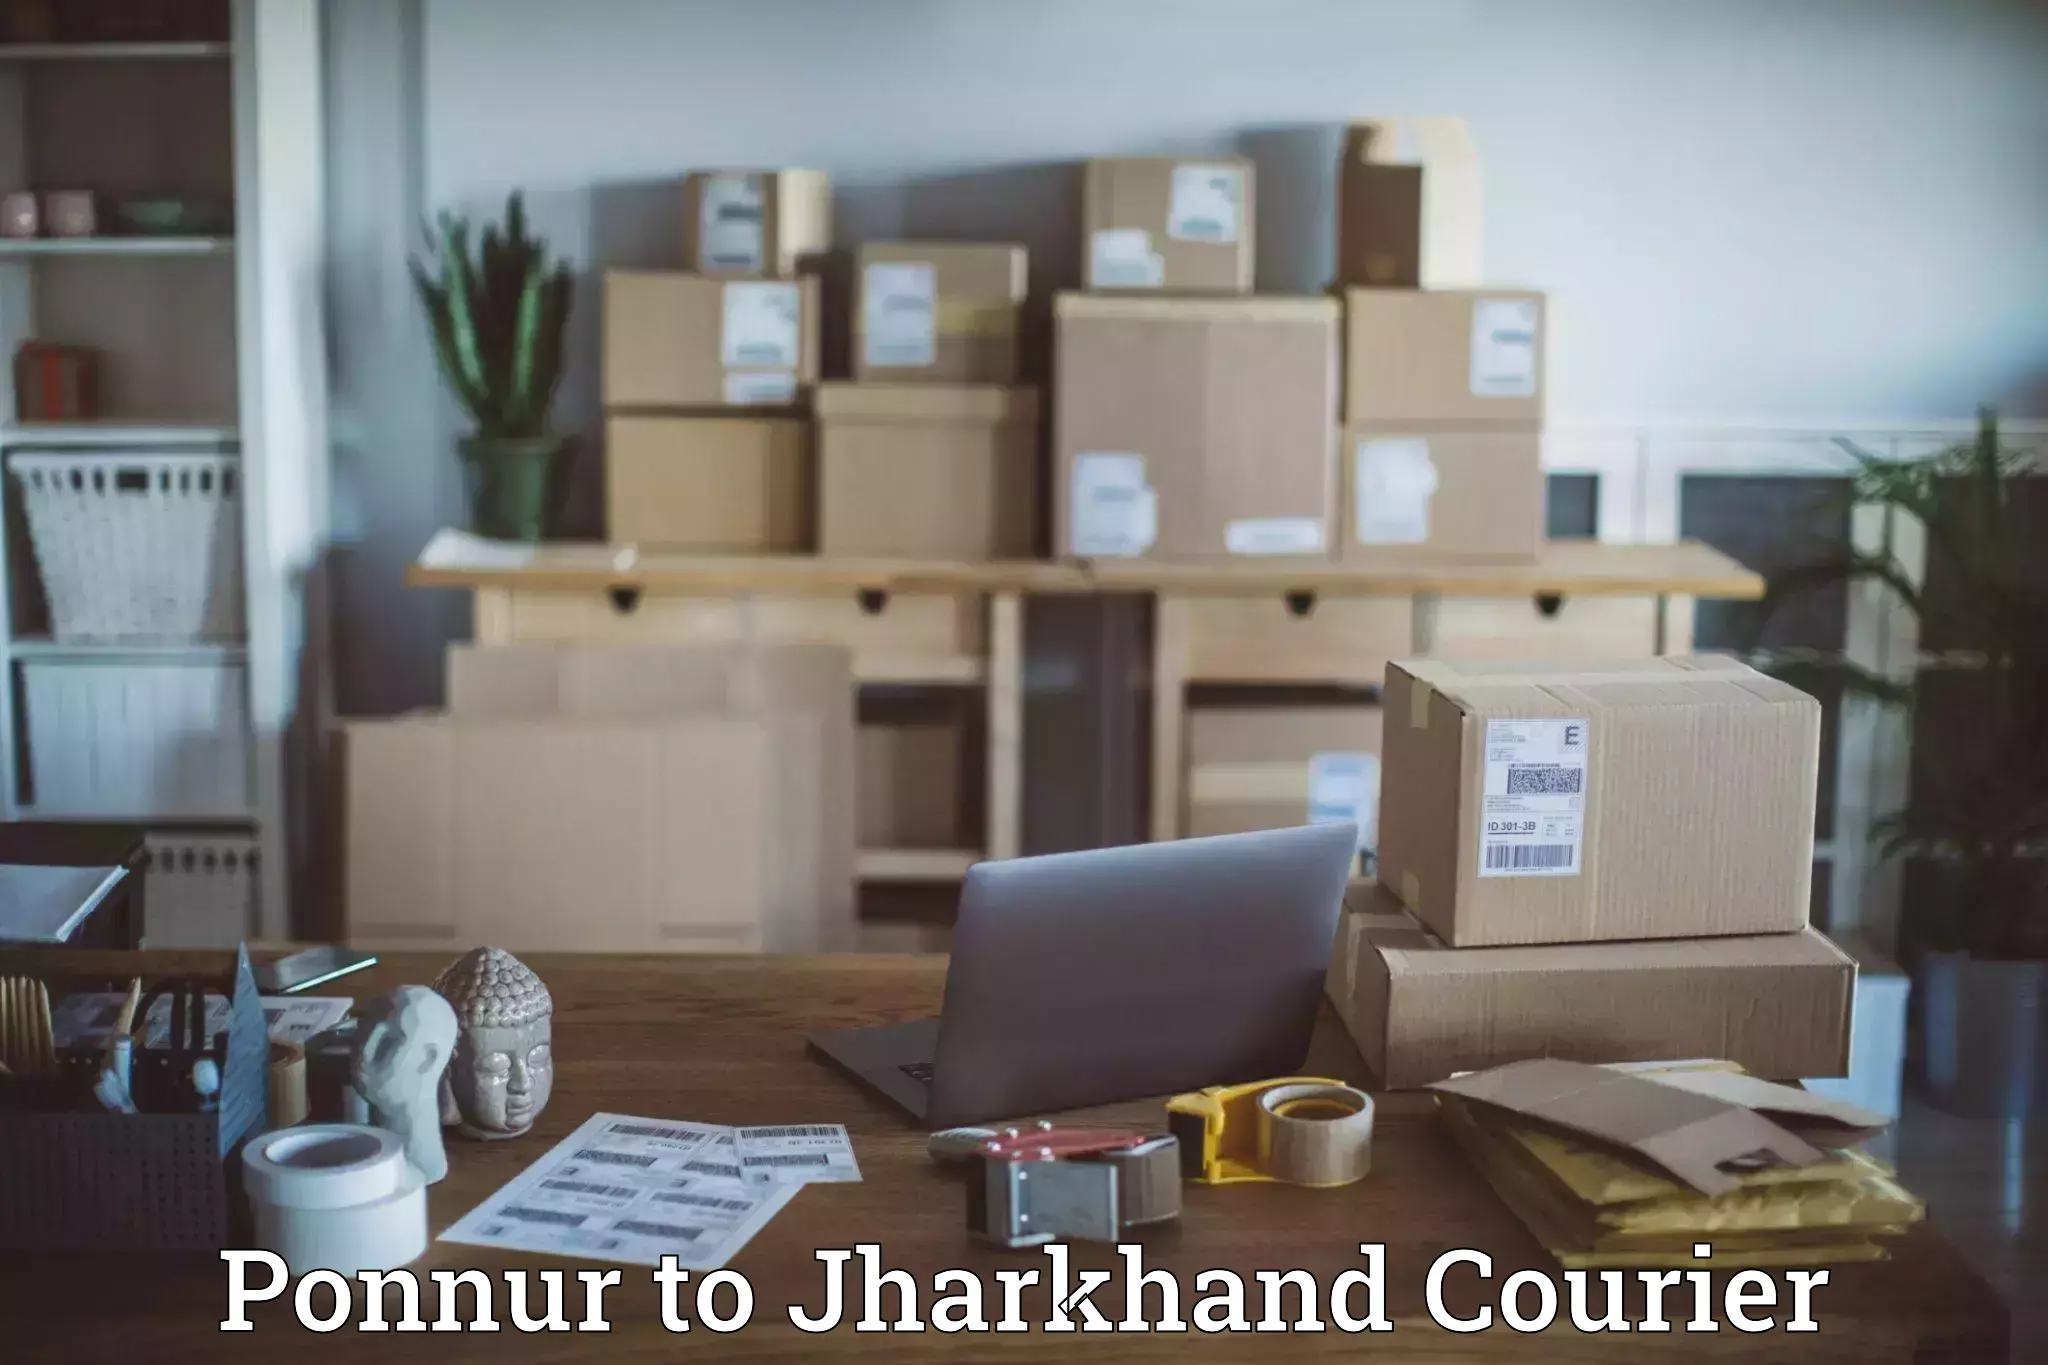 24/7 courier service in Ponnur to Jharkhand